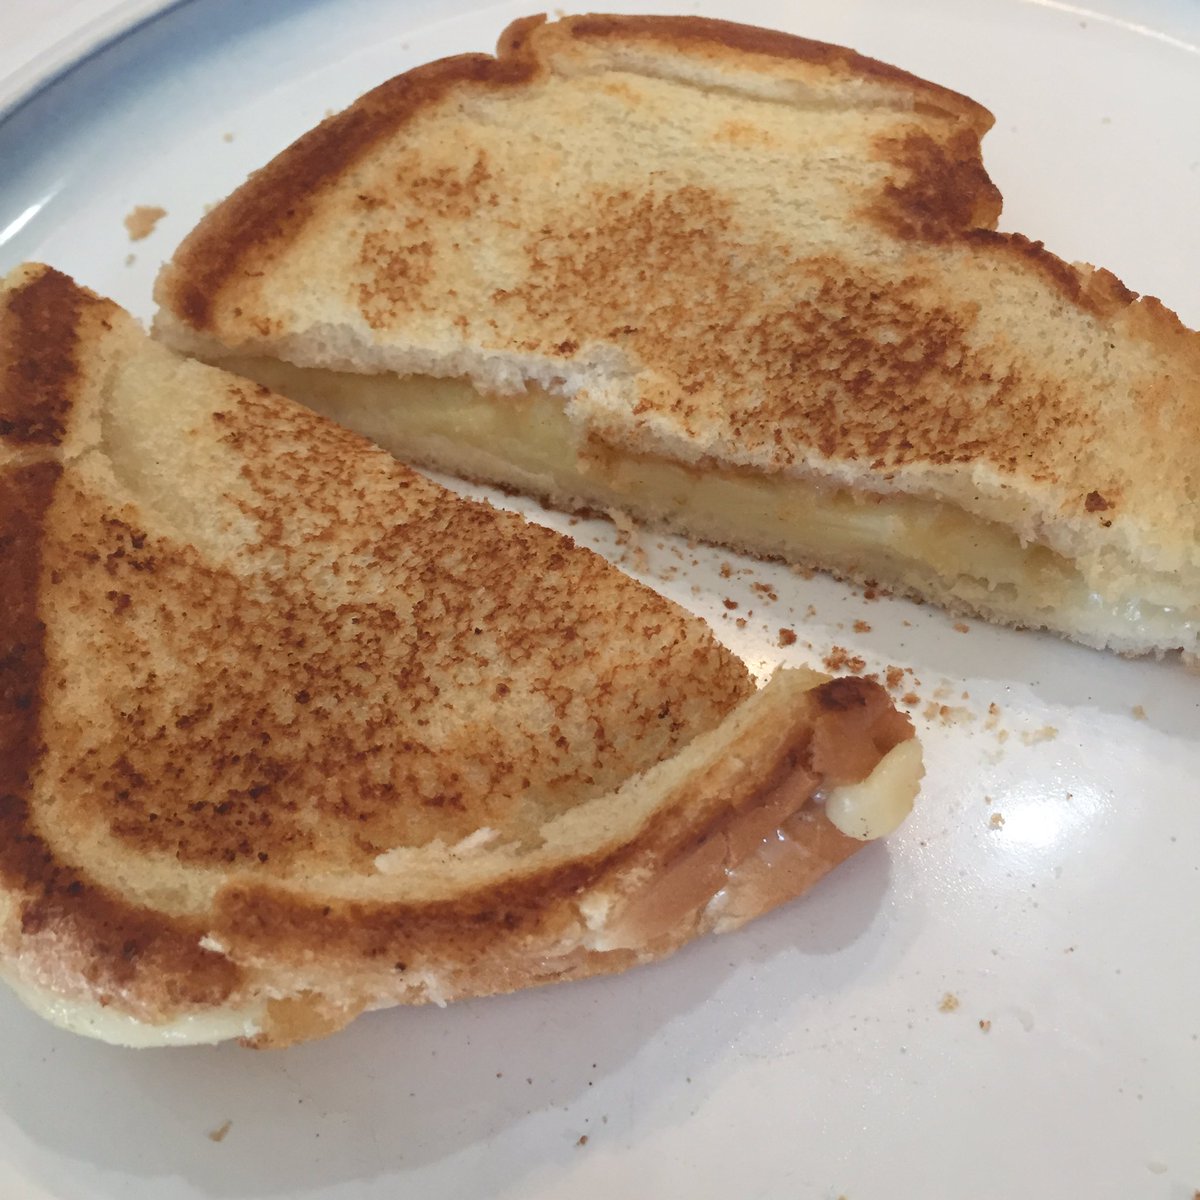 I have a student who’s Filipino. During lunch bunch last week, she revealed that her mother makes her grilled peanut butter and cheese sandwiches. So today, I tried it.